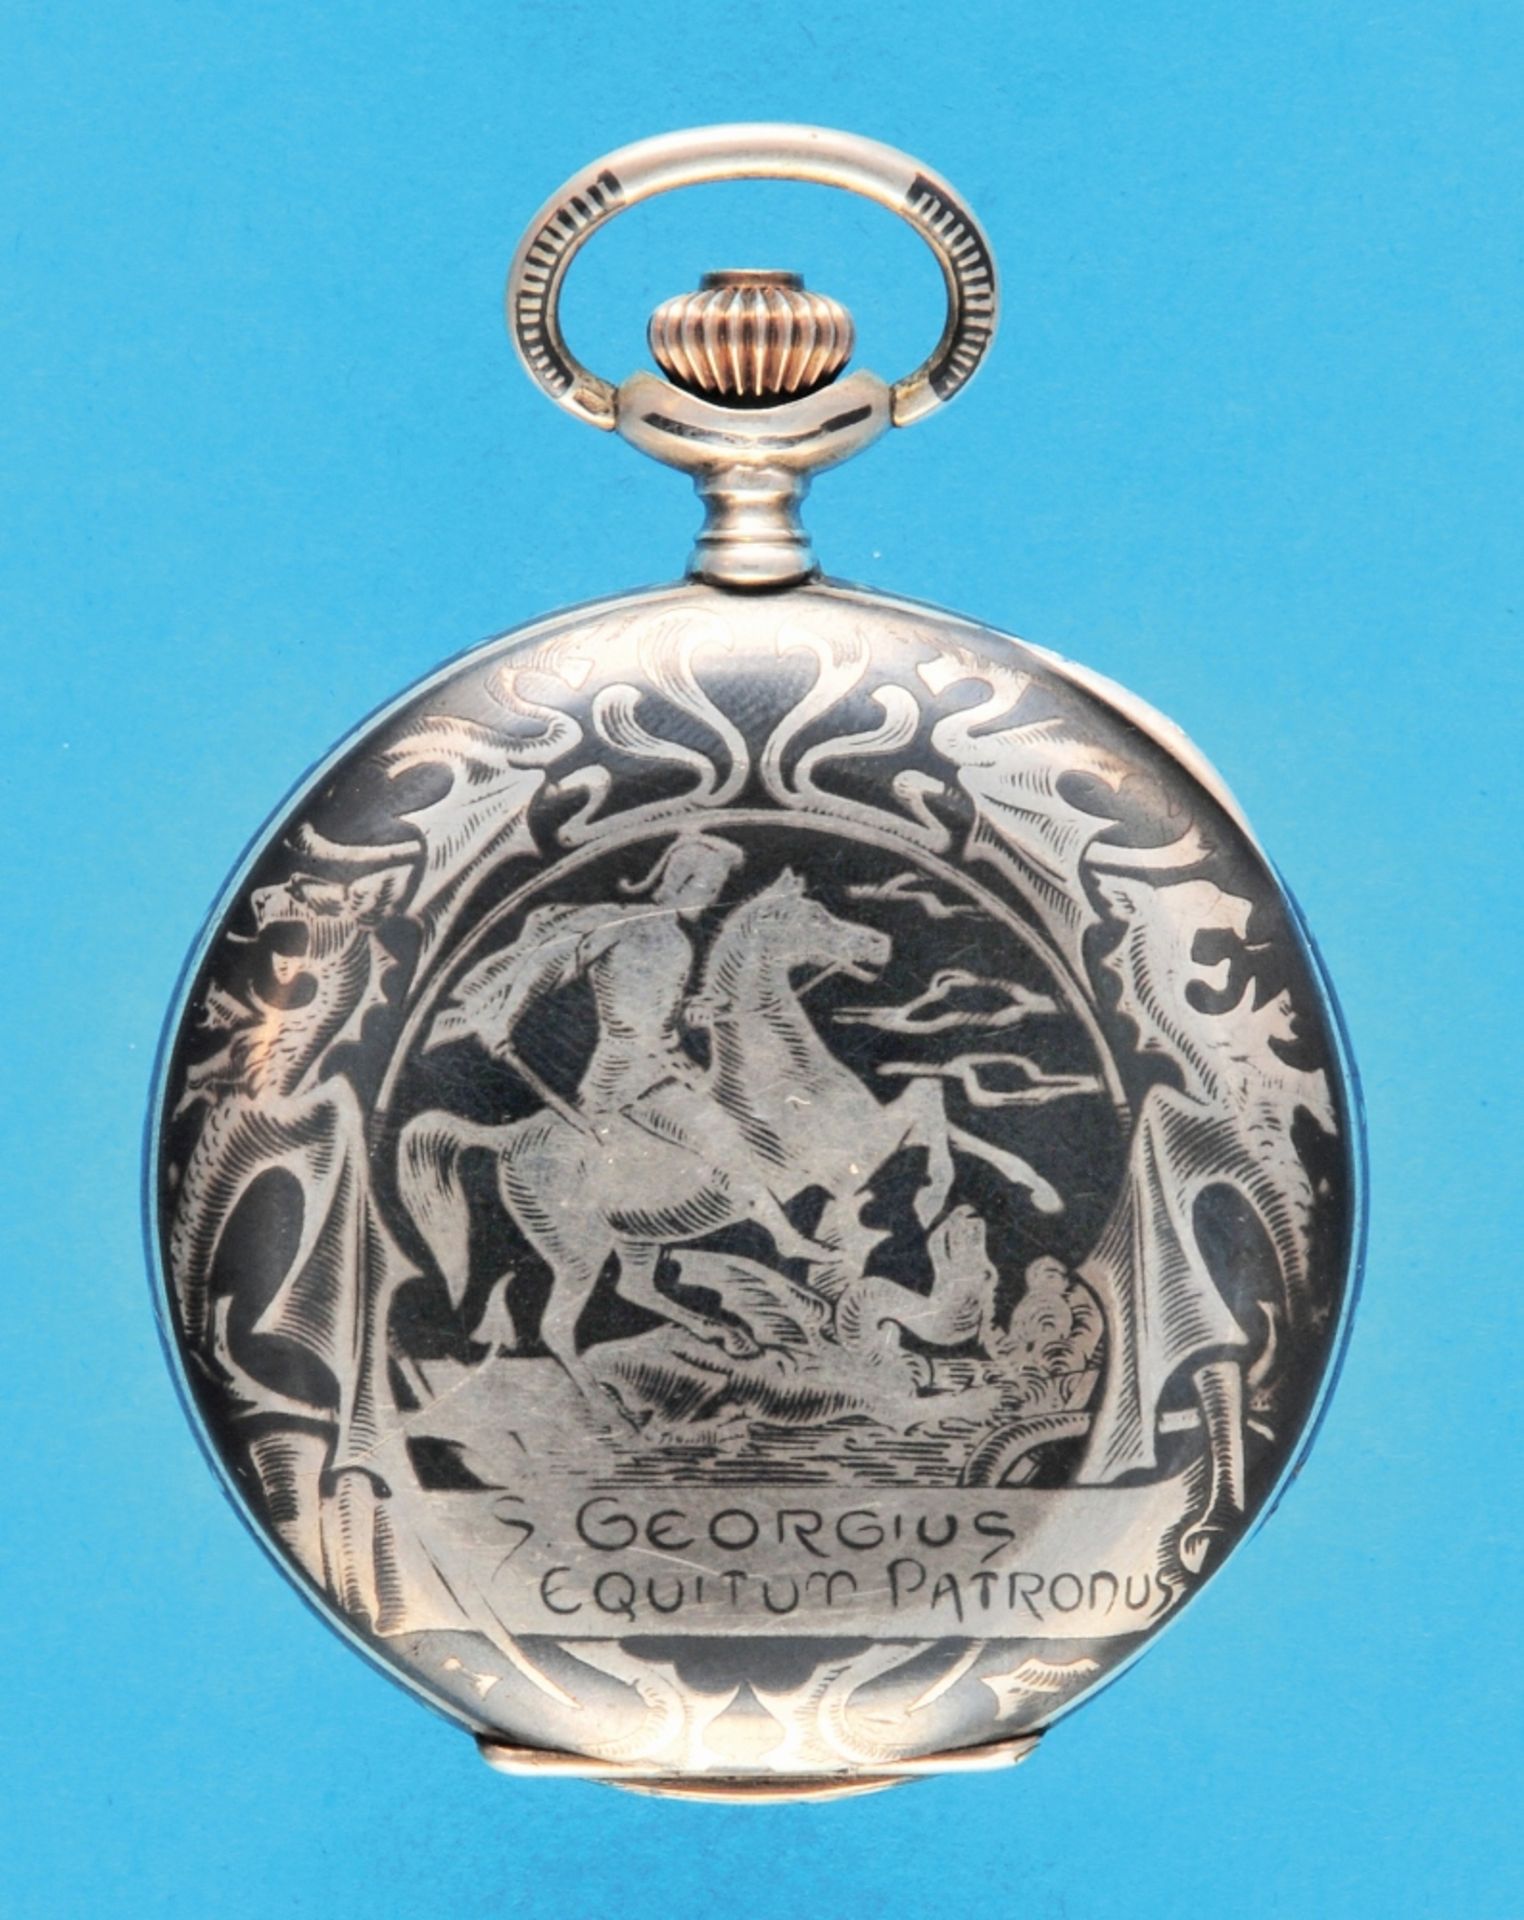 Doxa tulasilver pocket watch with jump cover, jump cover with floral tulasilver decoration,